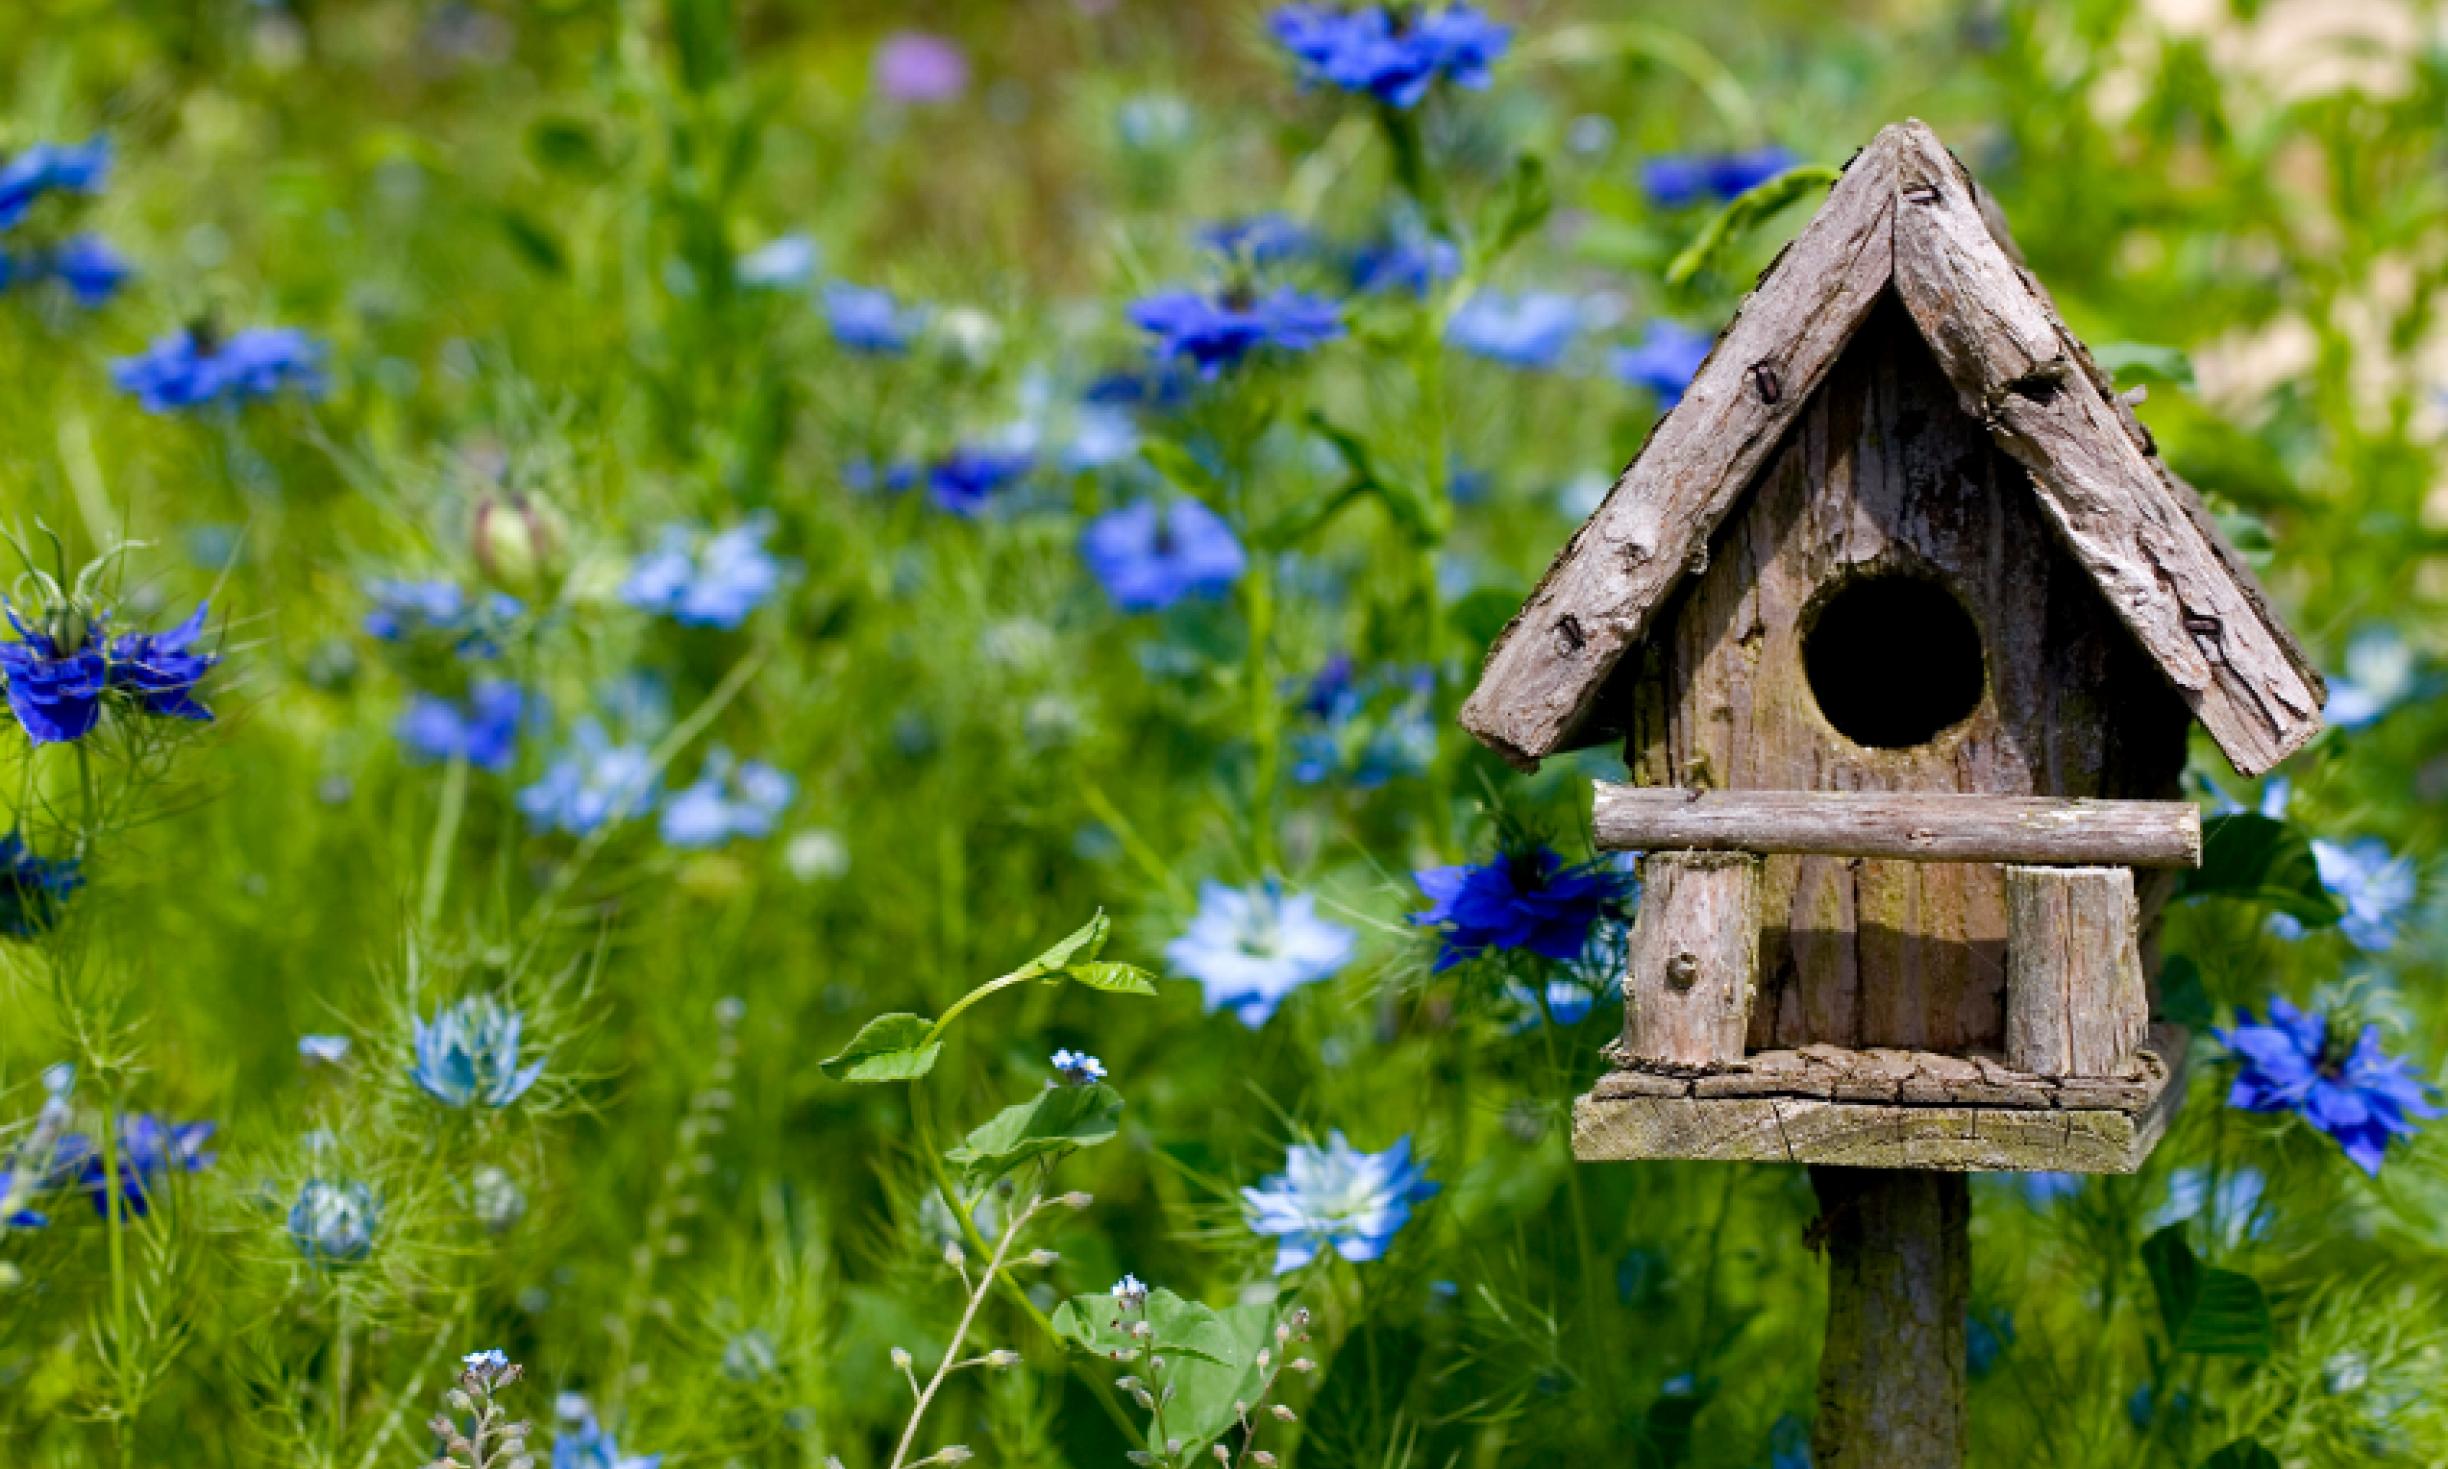 green field with many blue flowers, small wooden bird house, with round door